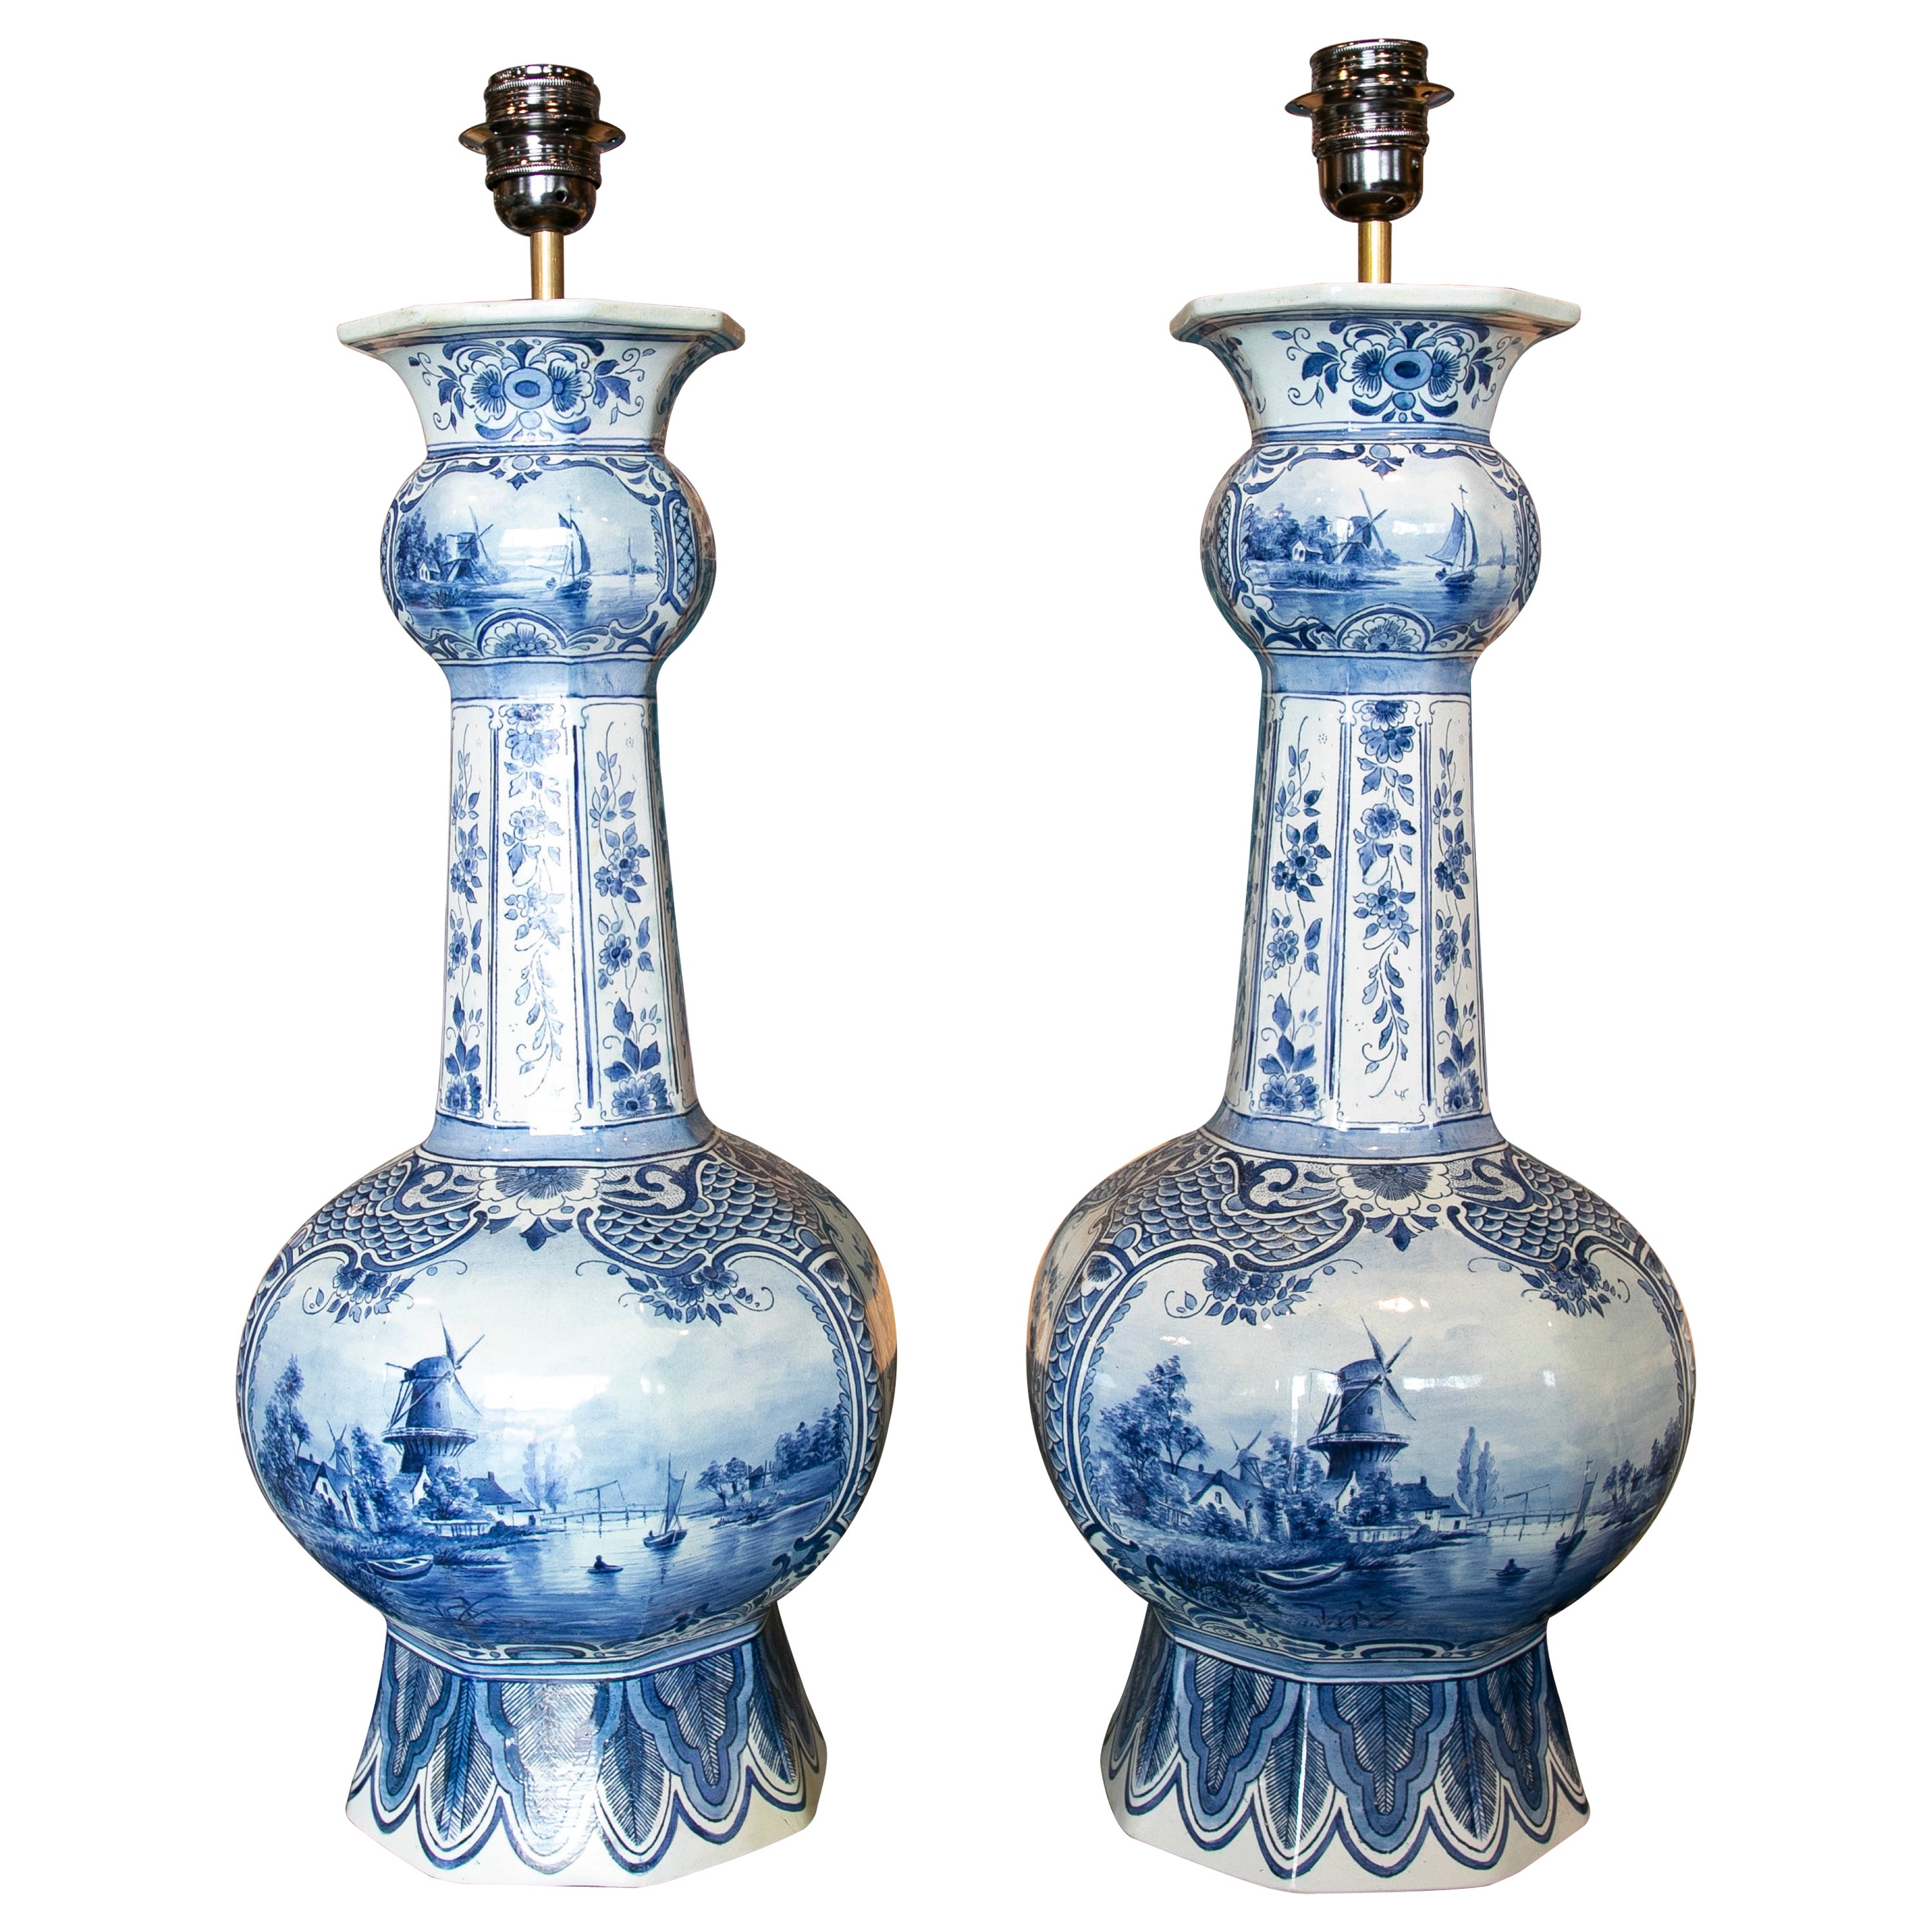 Pair of Lamps in Blue and White Glazed Ceramic Delf, Numbered and Signed